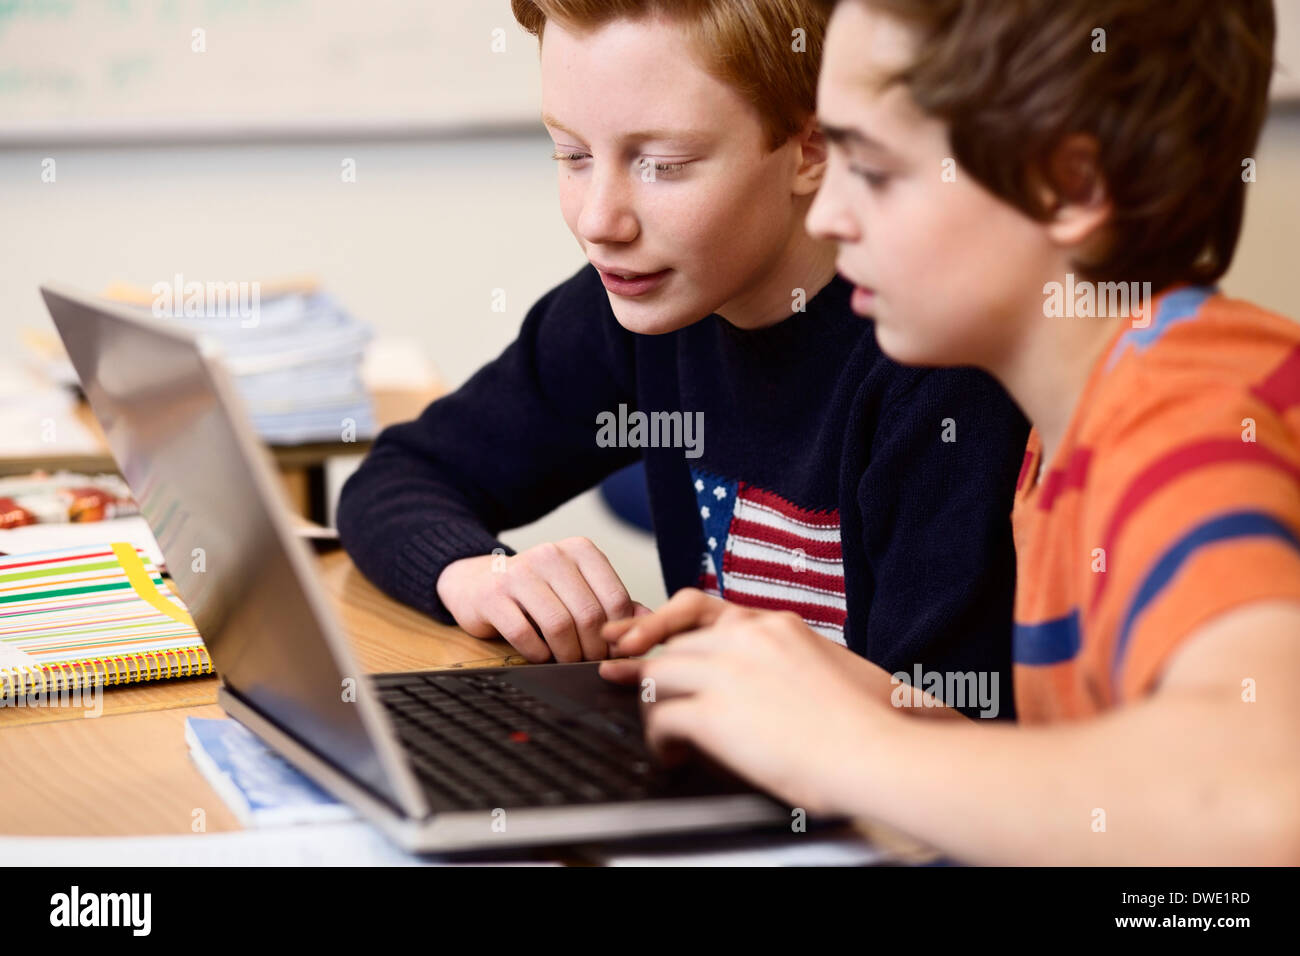 High school boys using laptop at desk in classroom Stock Photo